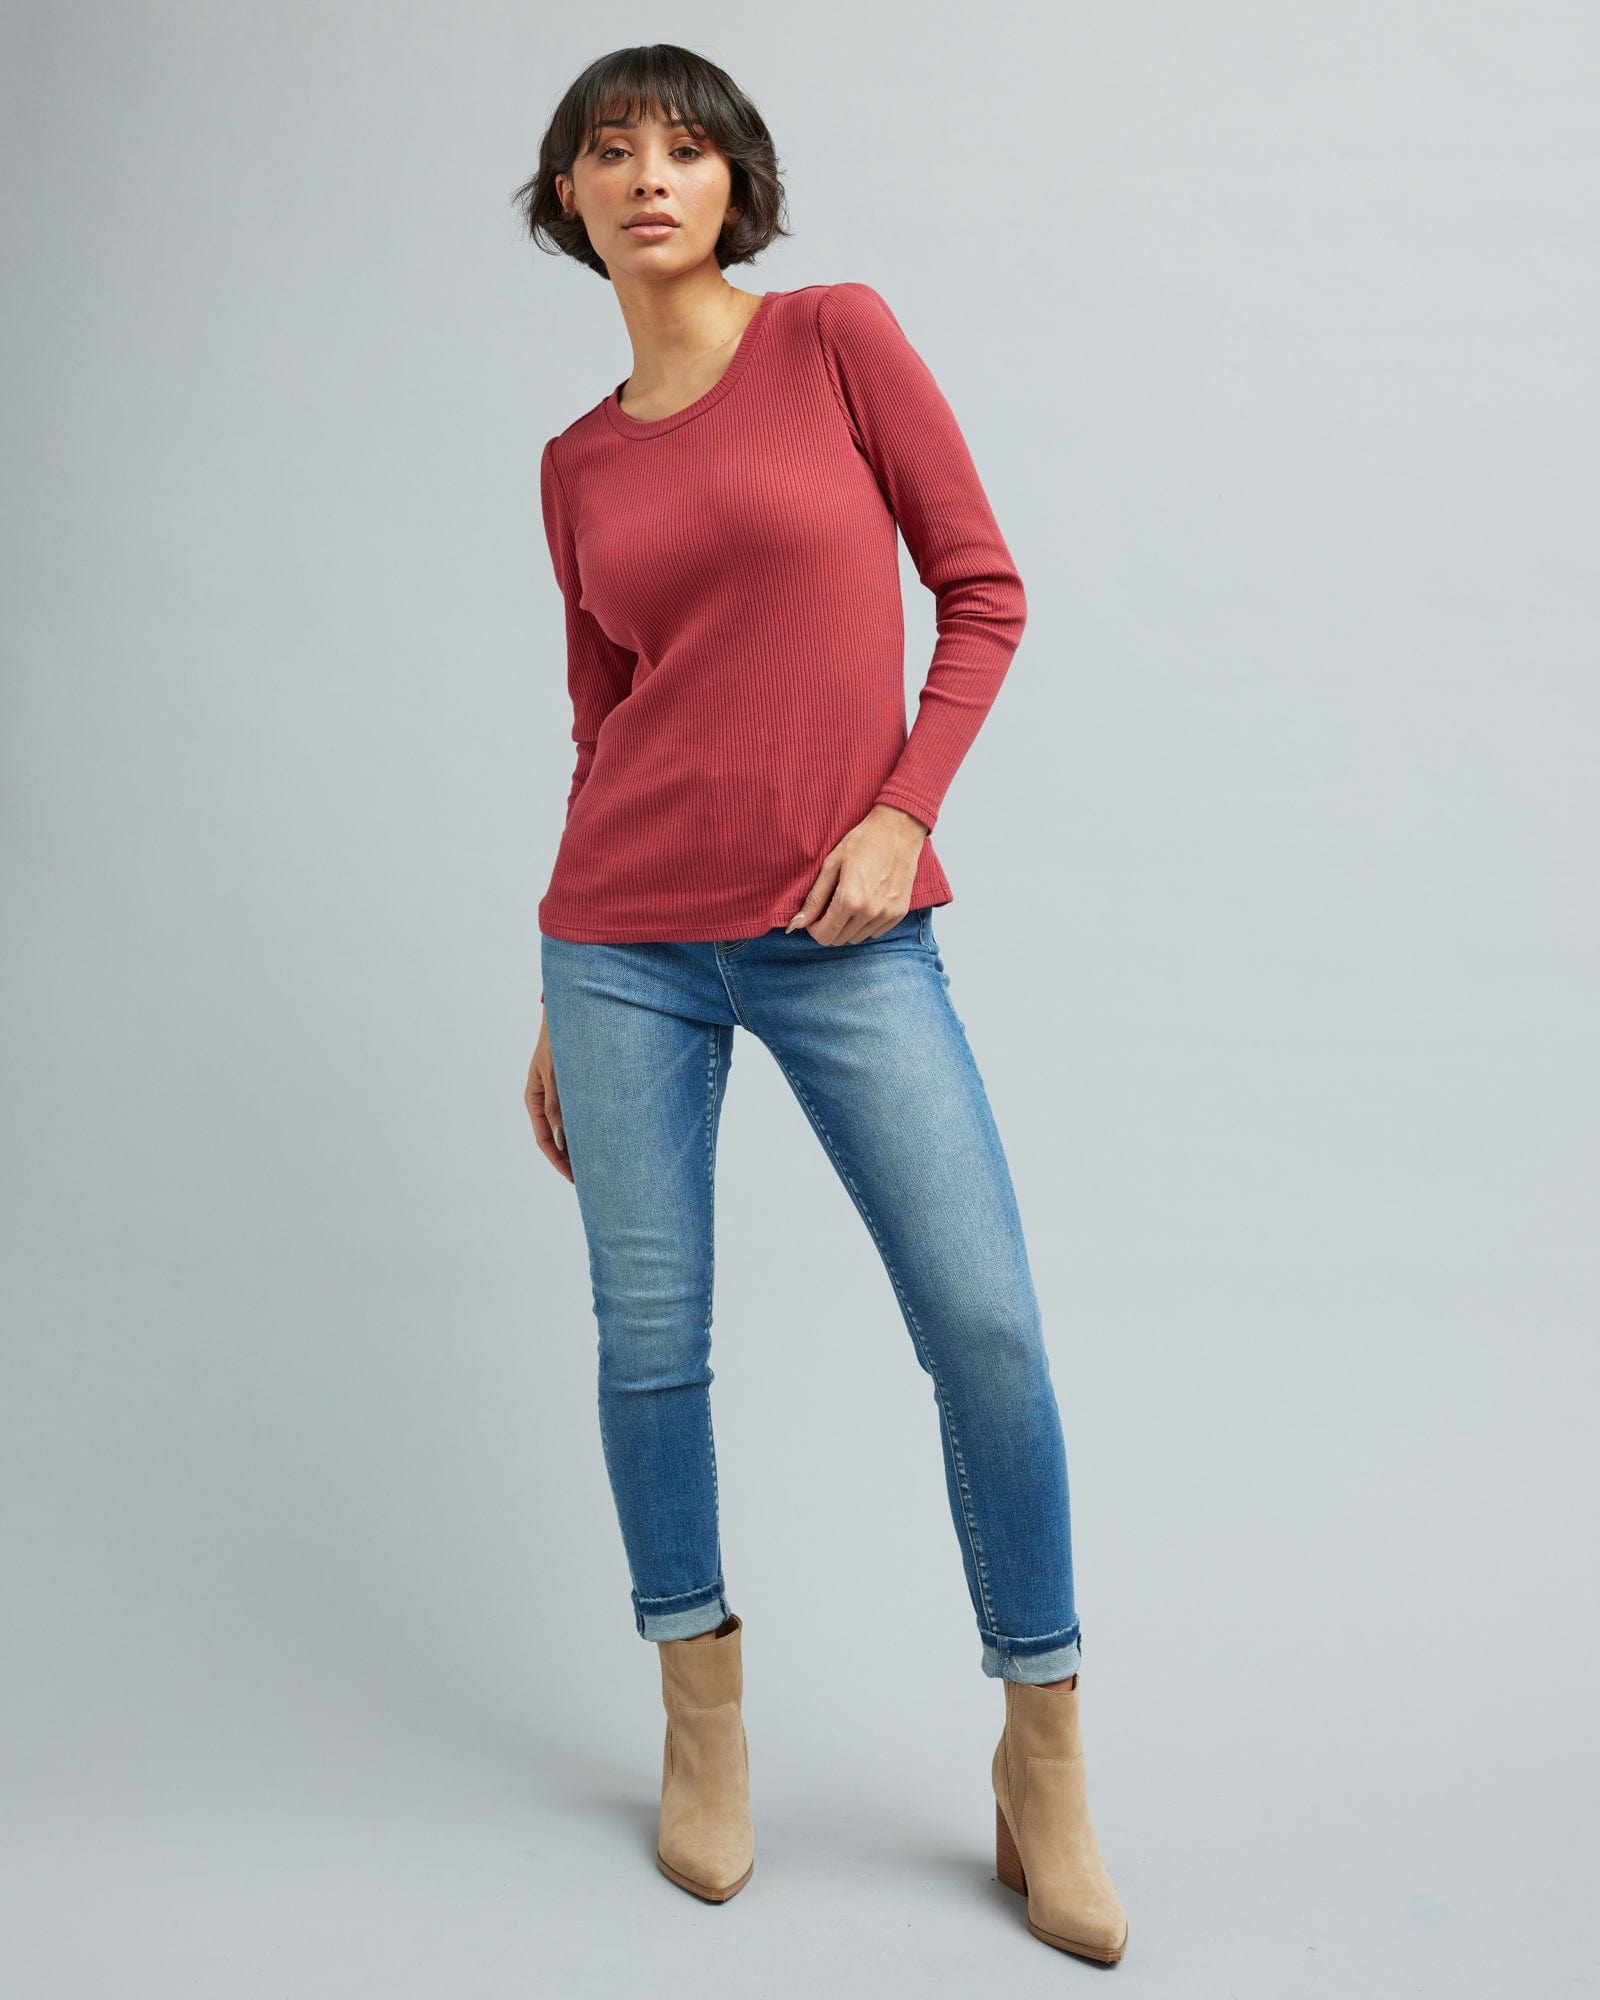 Woman in a long sleeve, ribbed t-shirt